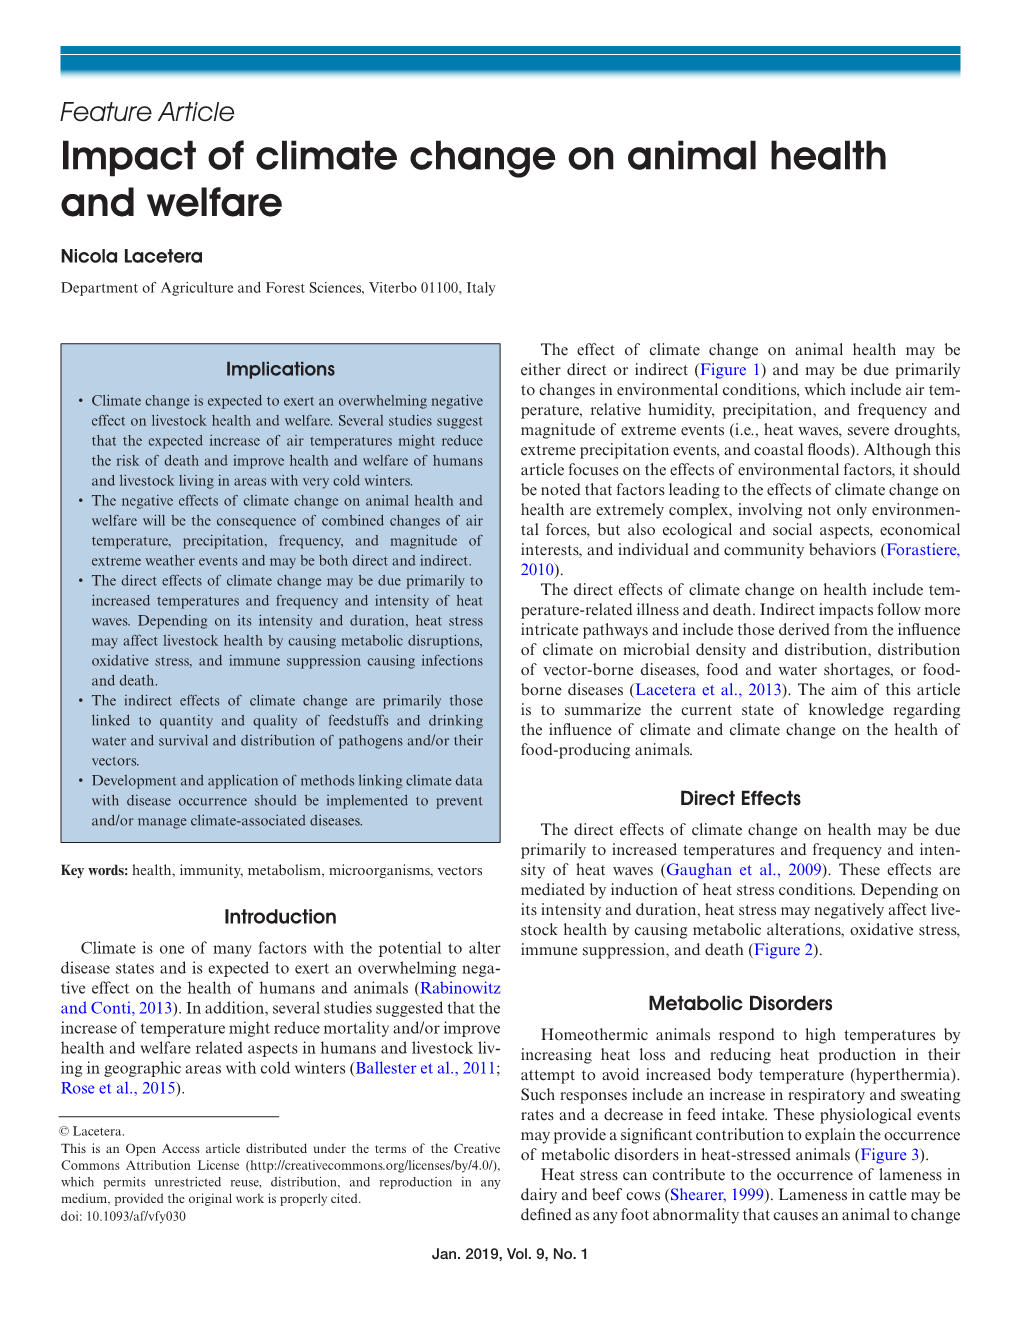 Impact of Climate Change on Animal Health and Welfare